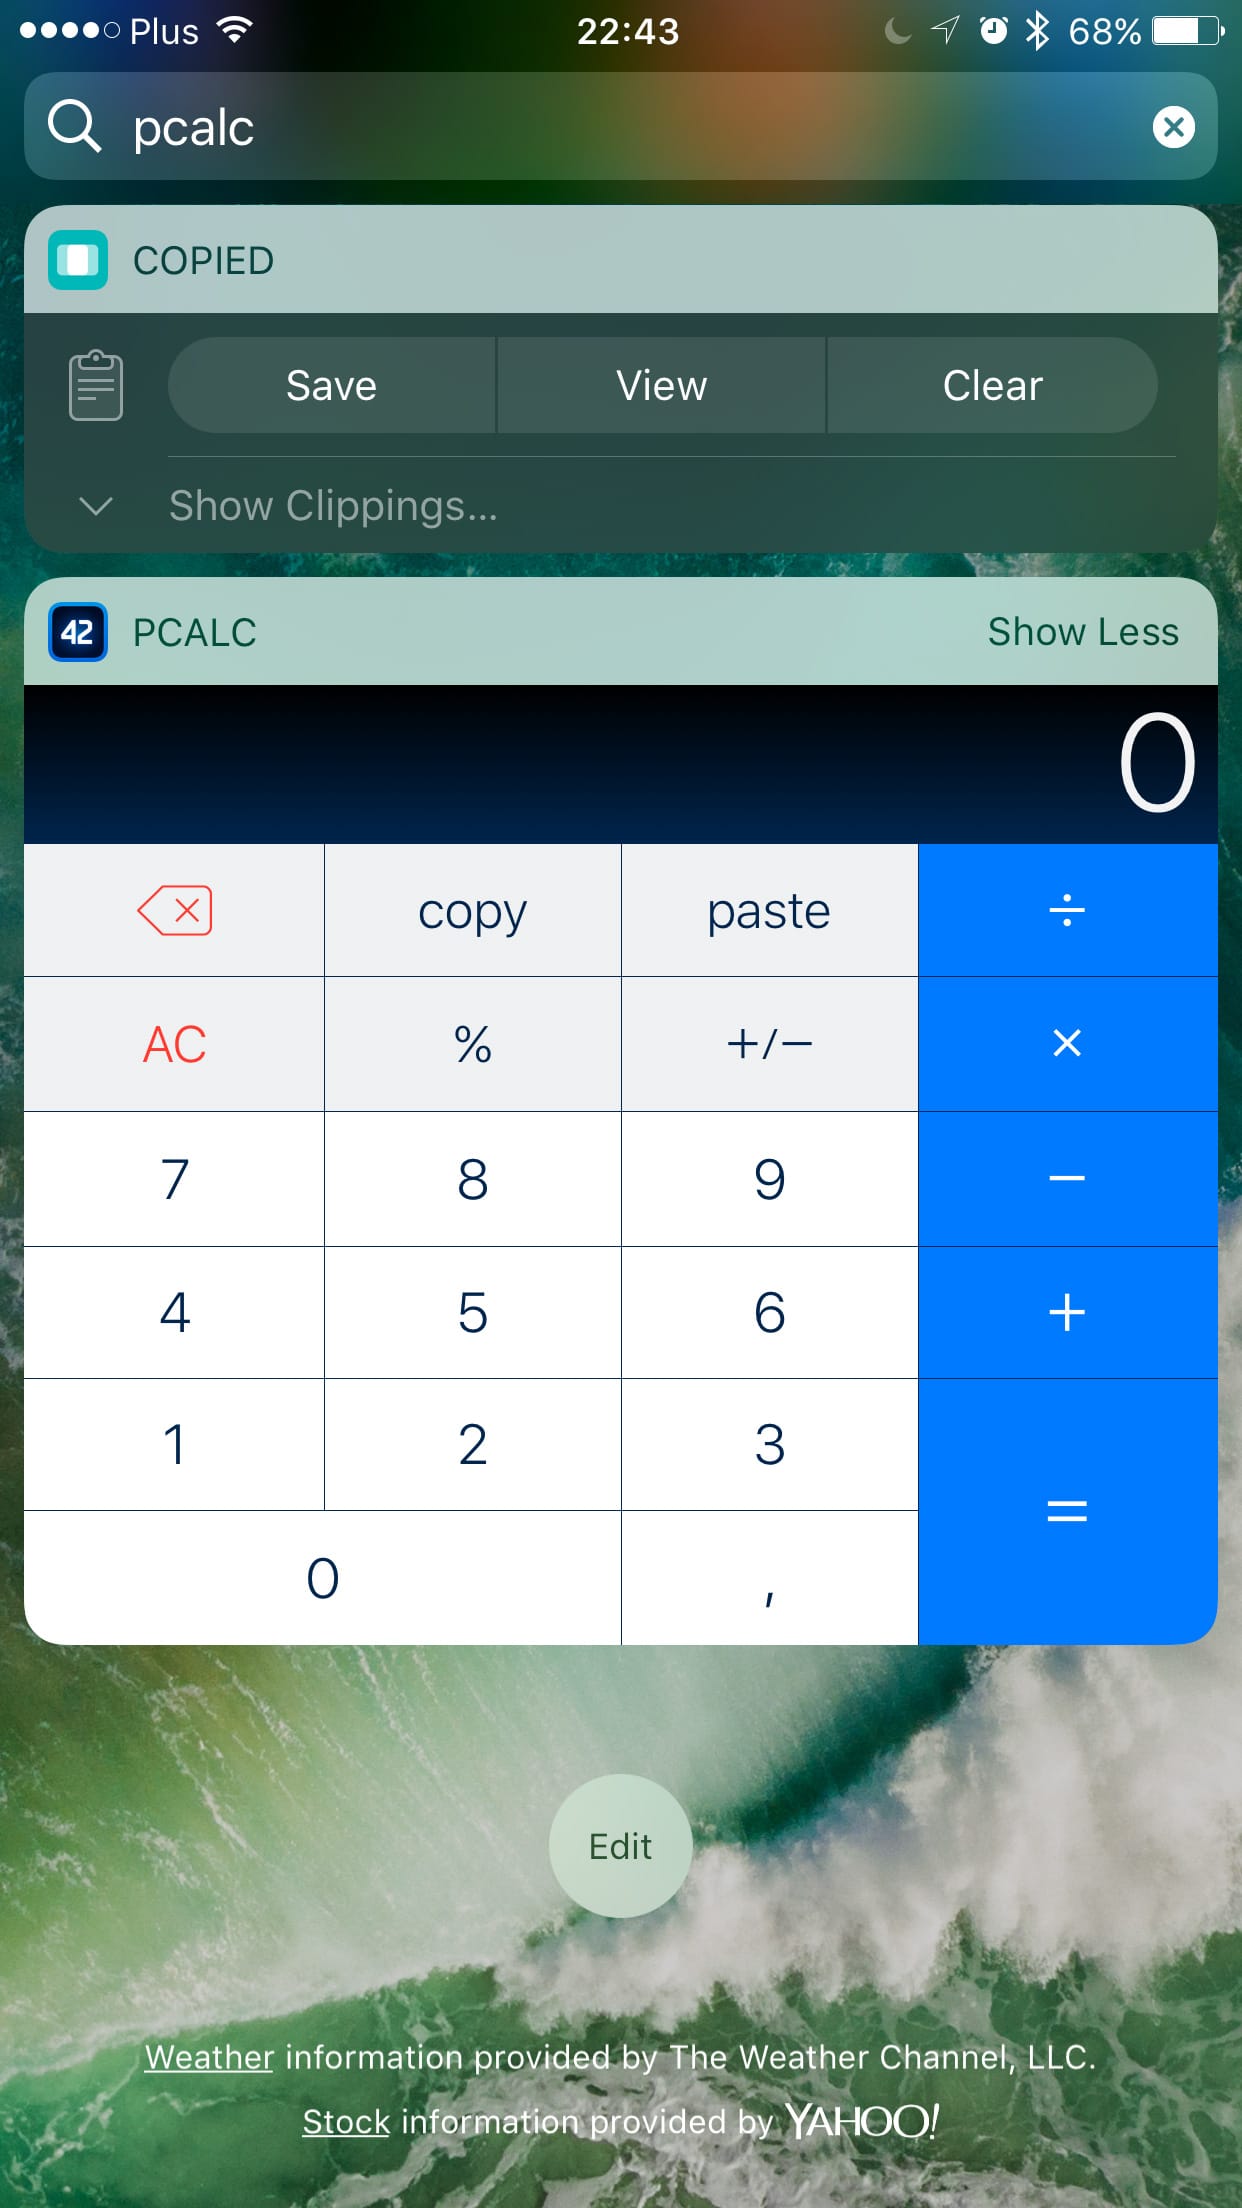 pcalc app android